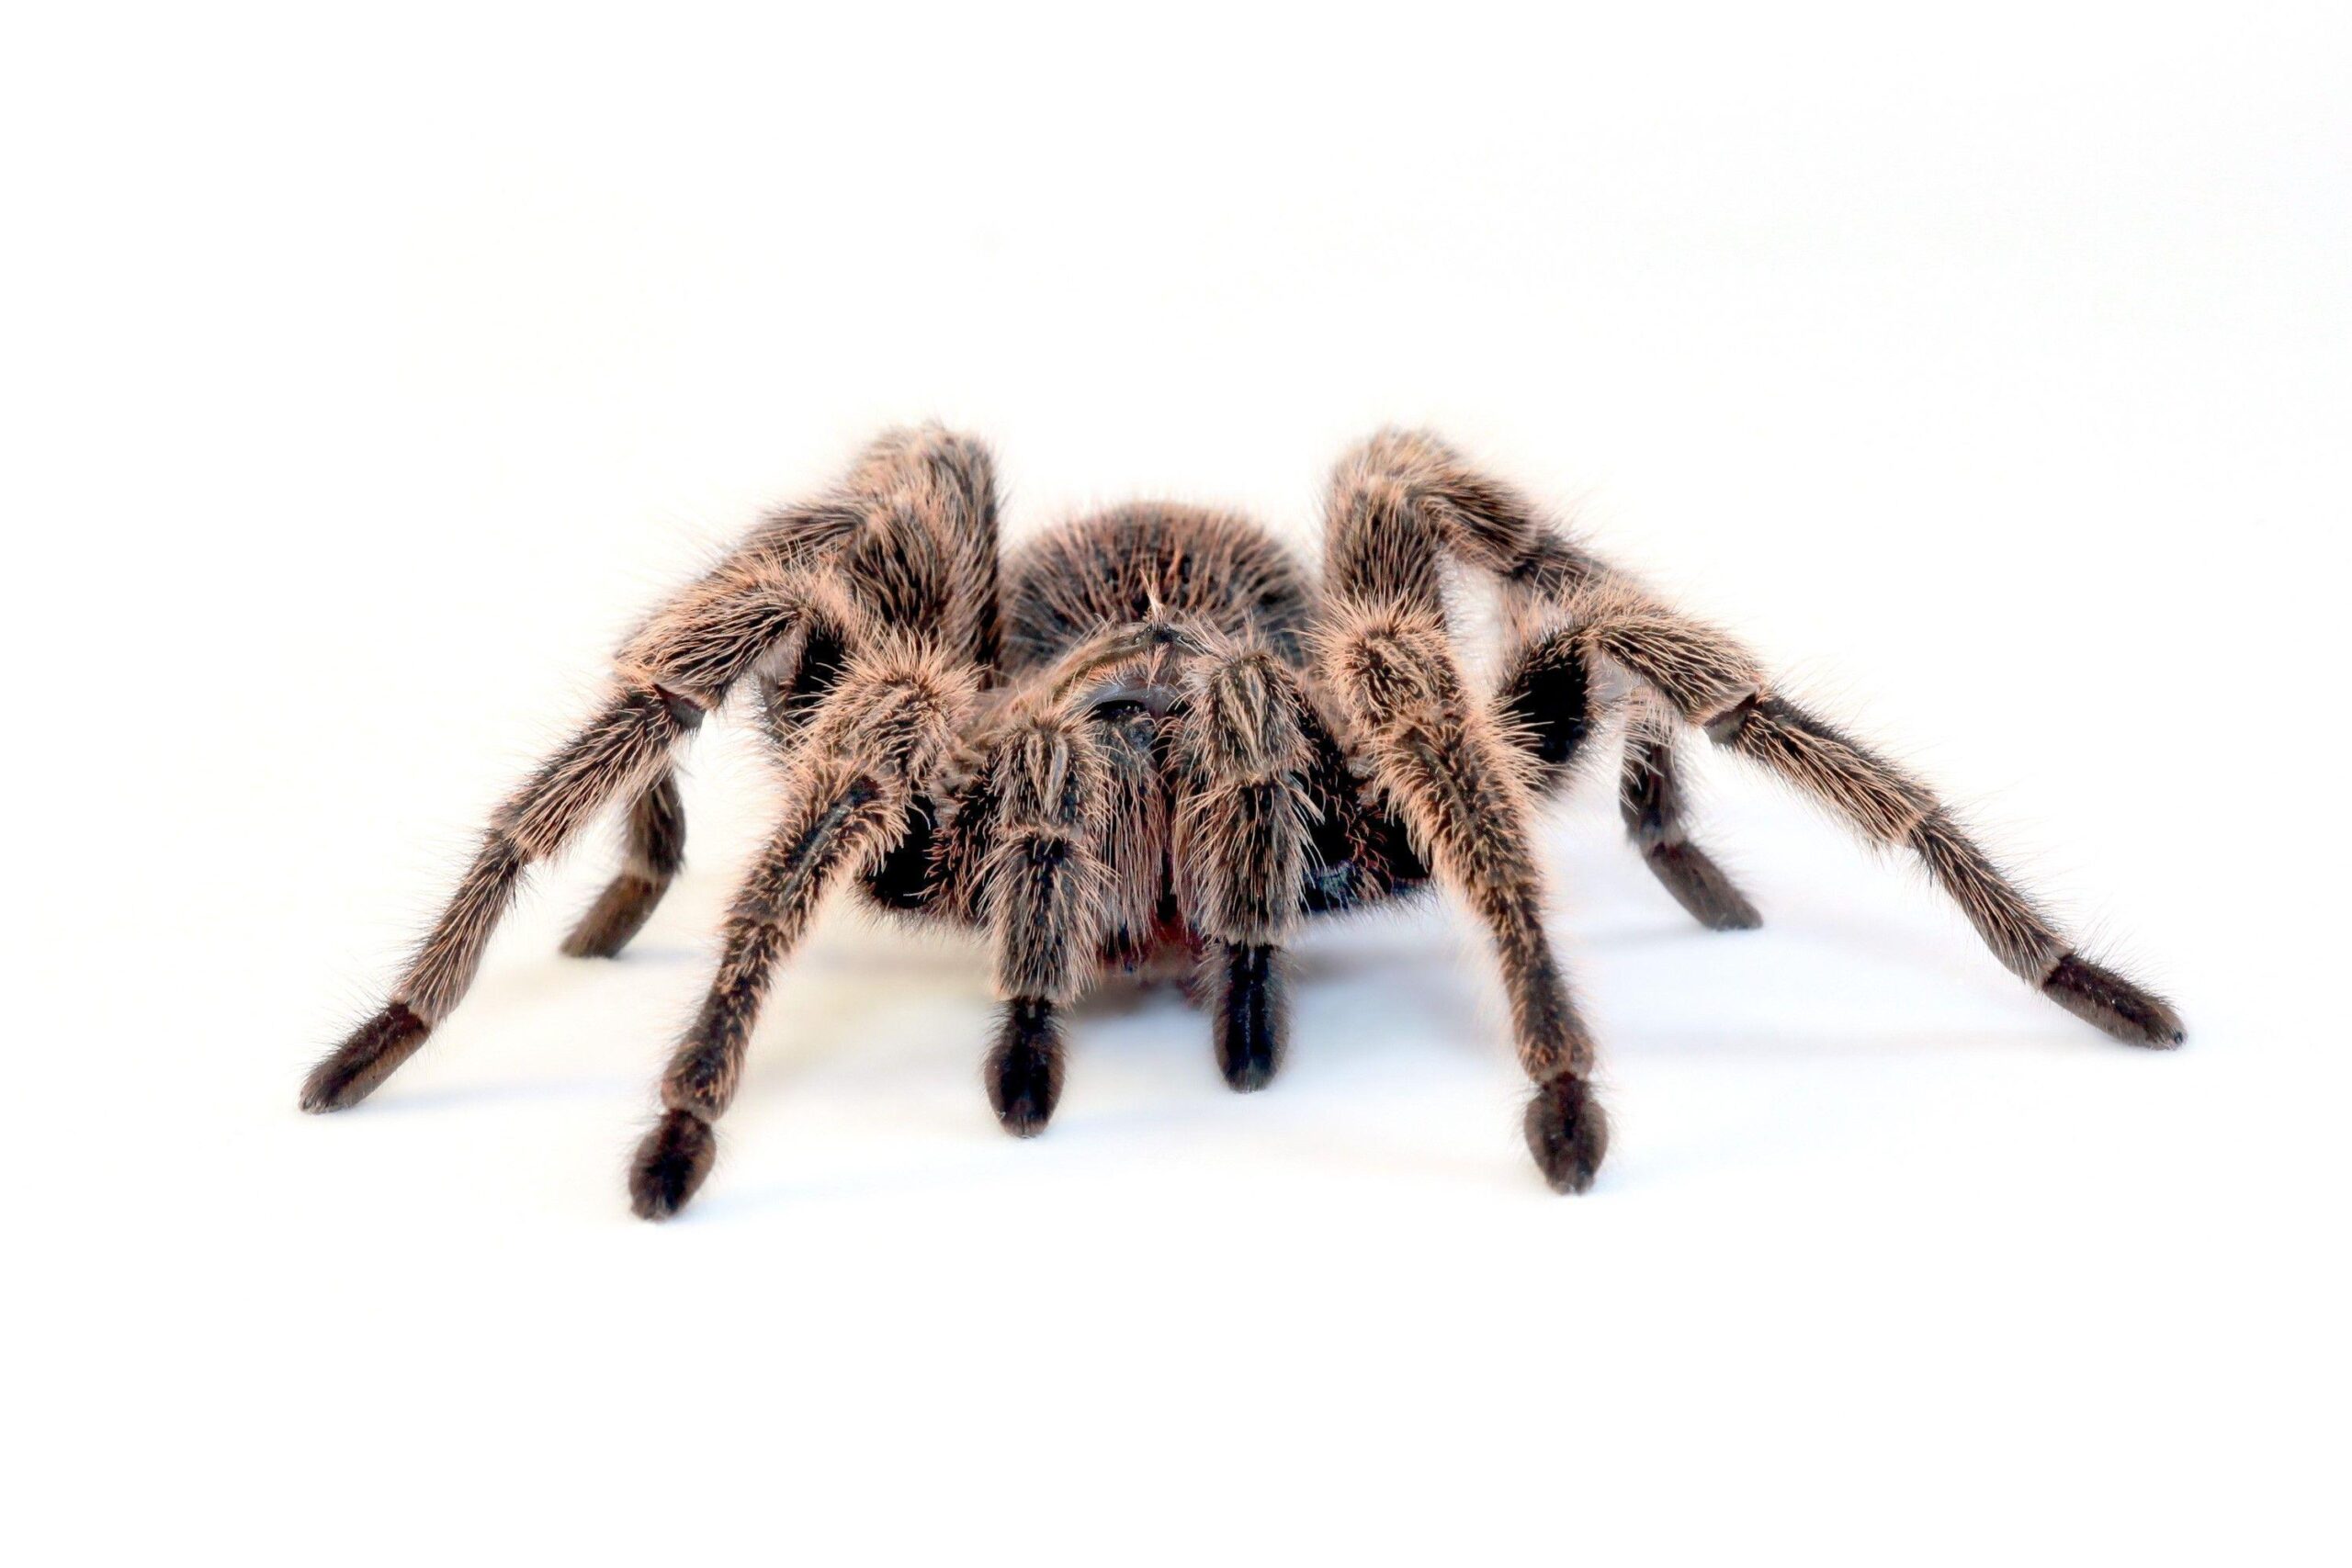 spiders, simple background, tarantula, white backgrounds Wallpapers